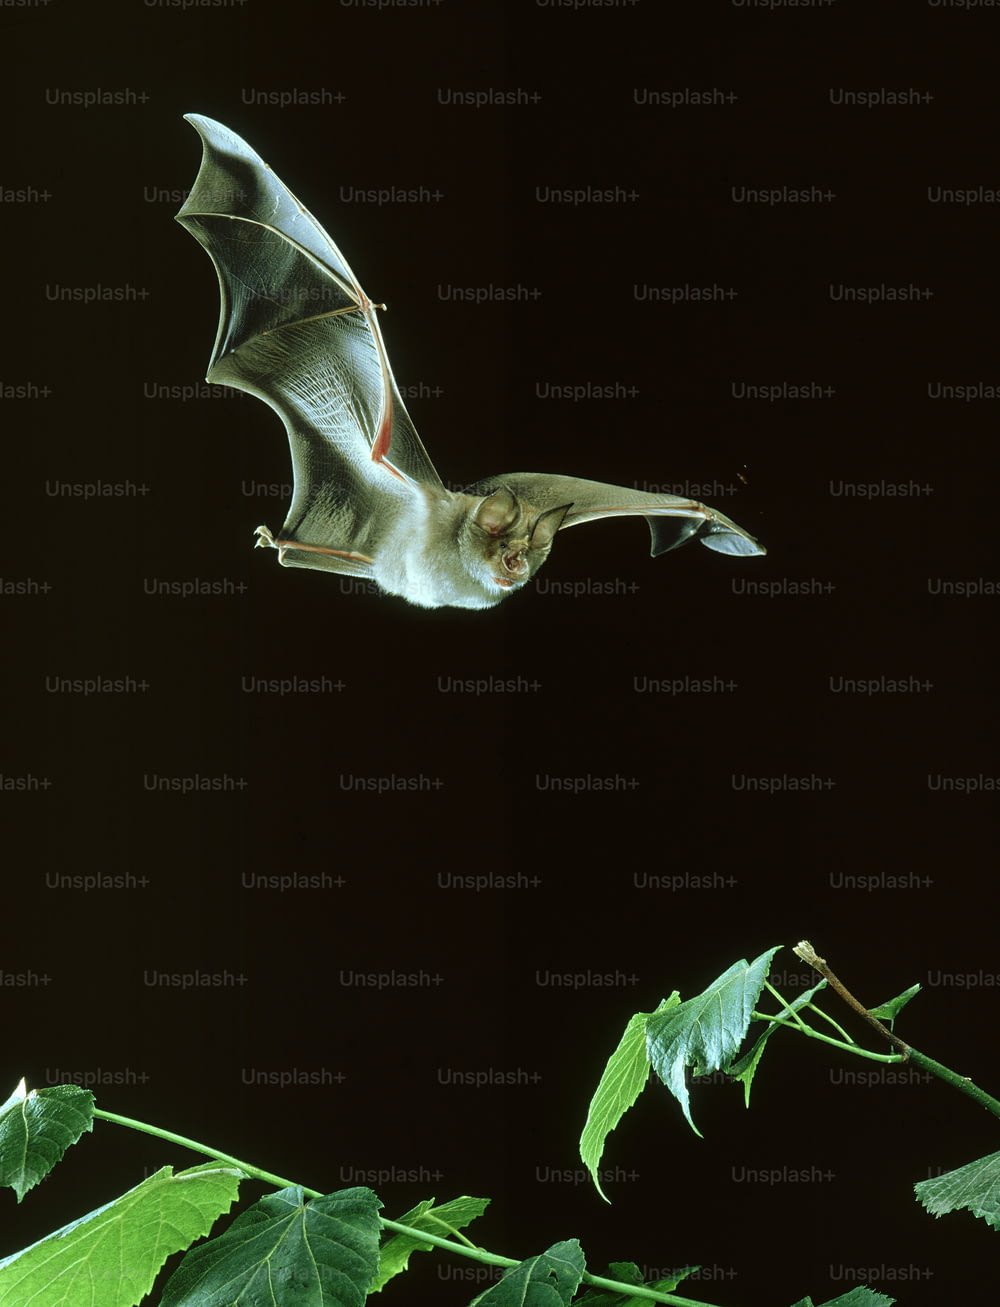 a bat flying in the air over a leafy branch